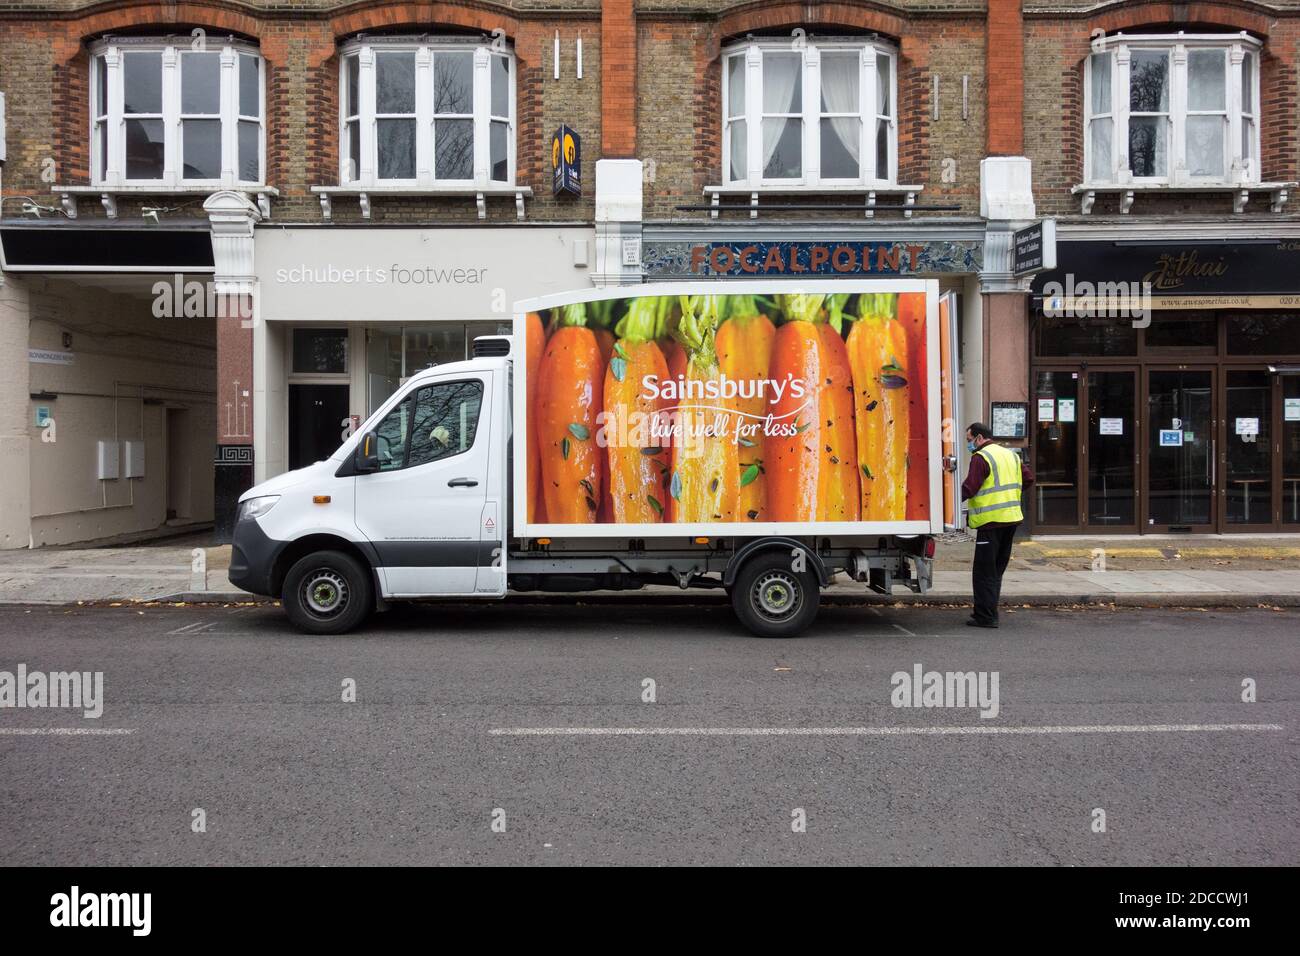 A Sainsbury's Eat Well for Less home delivery driver and van on a London street Stock Photo